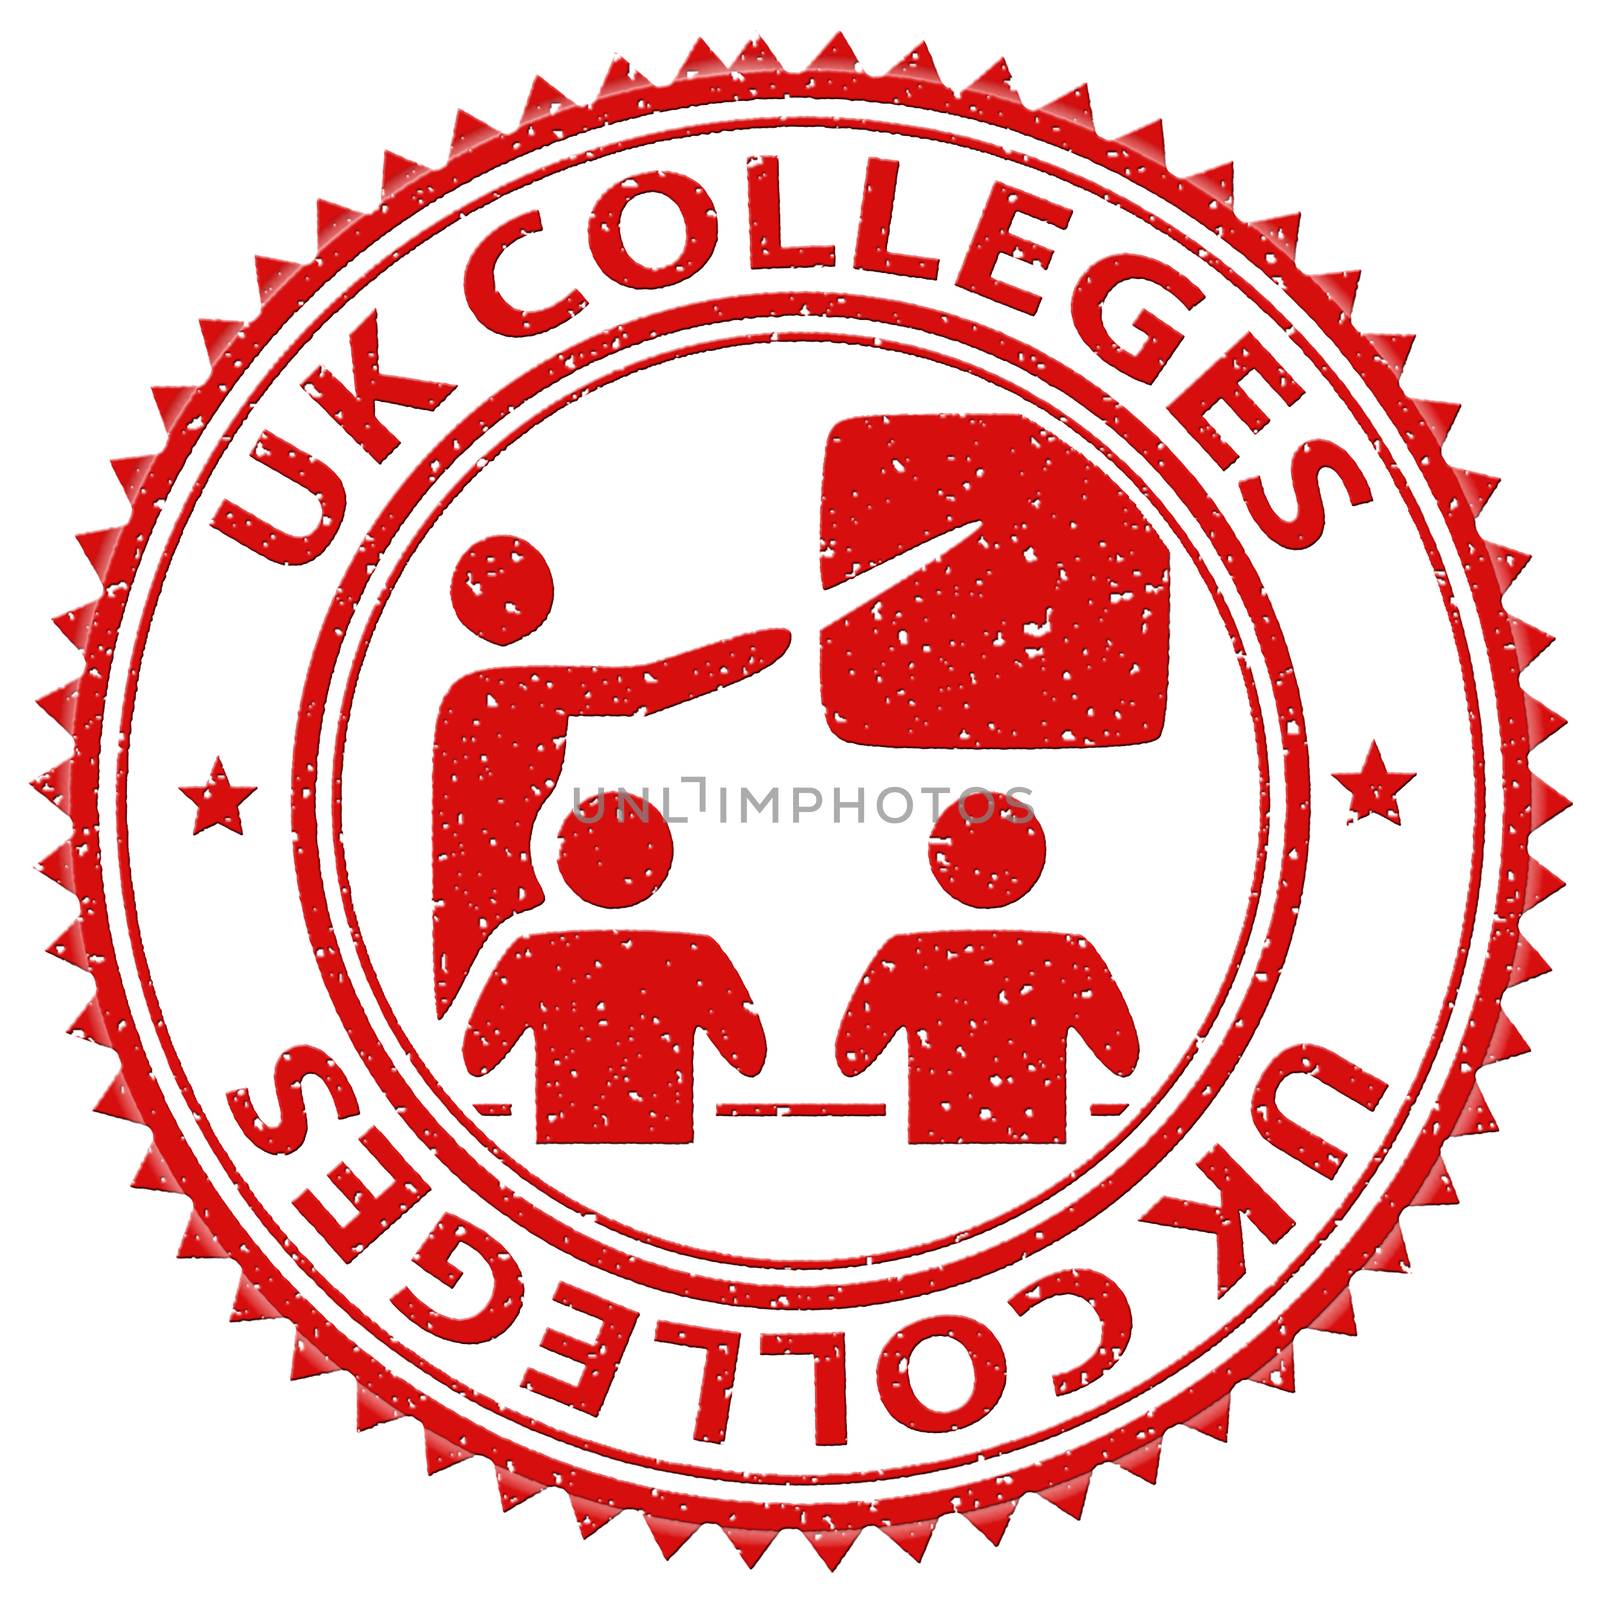 Uk Colleges Shows United Kingdom And Britain by stuartmiles